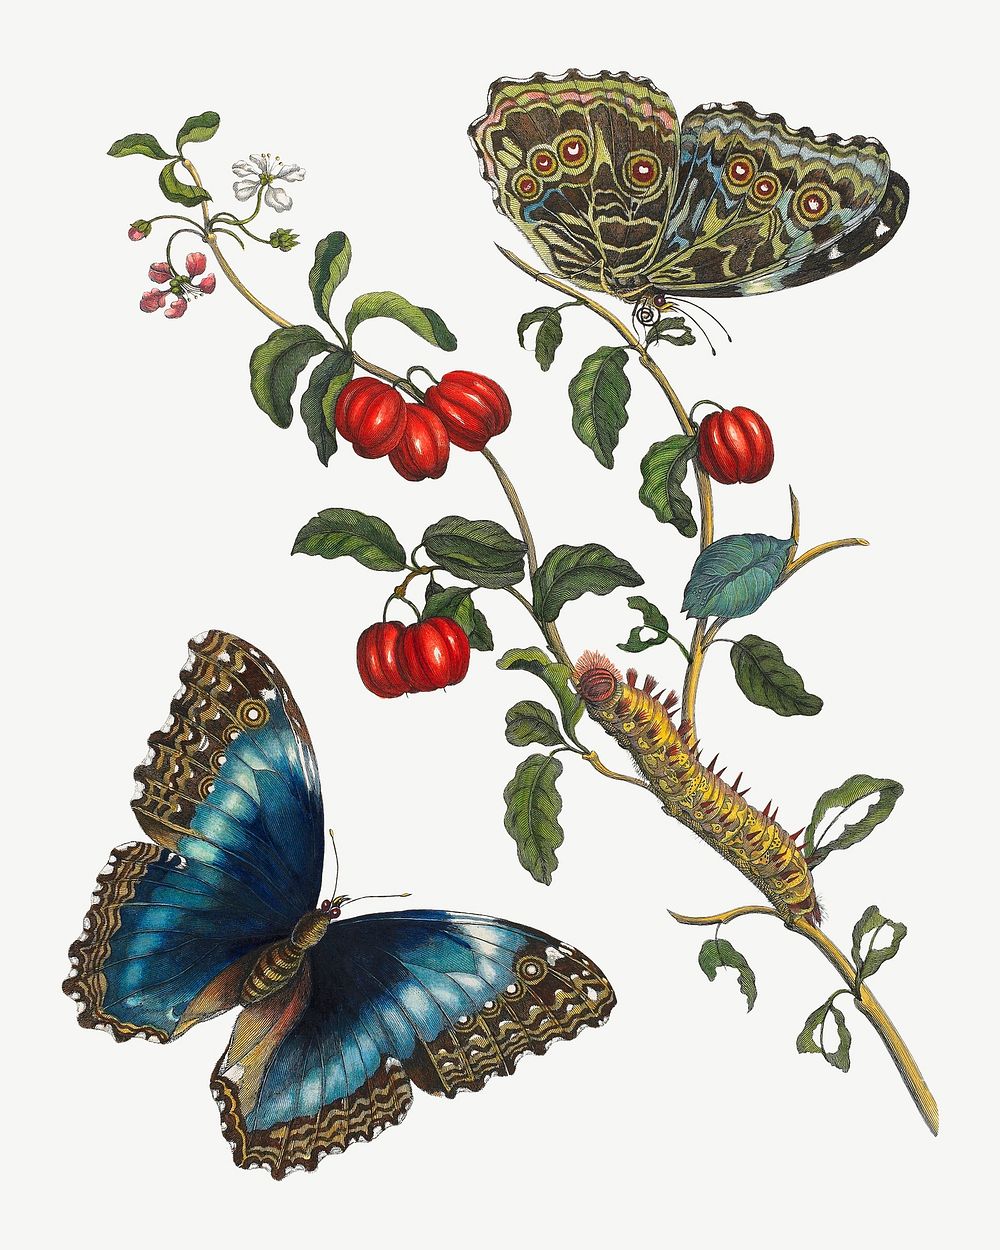 Blue Butterflies and Red Fruits, vintage botanical illustration by Maria Sibylla Merian psd. Remixed by rawpixel.